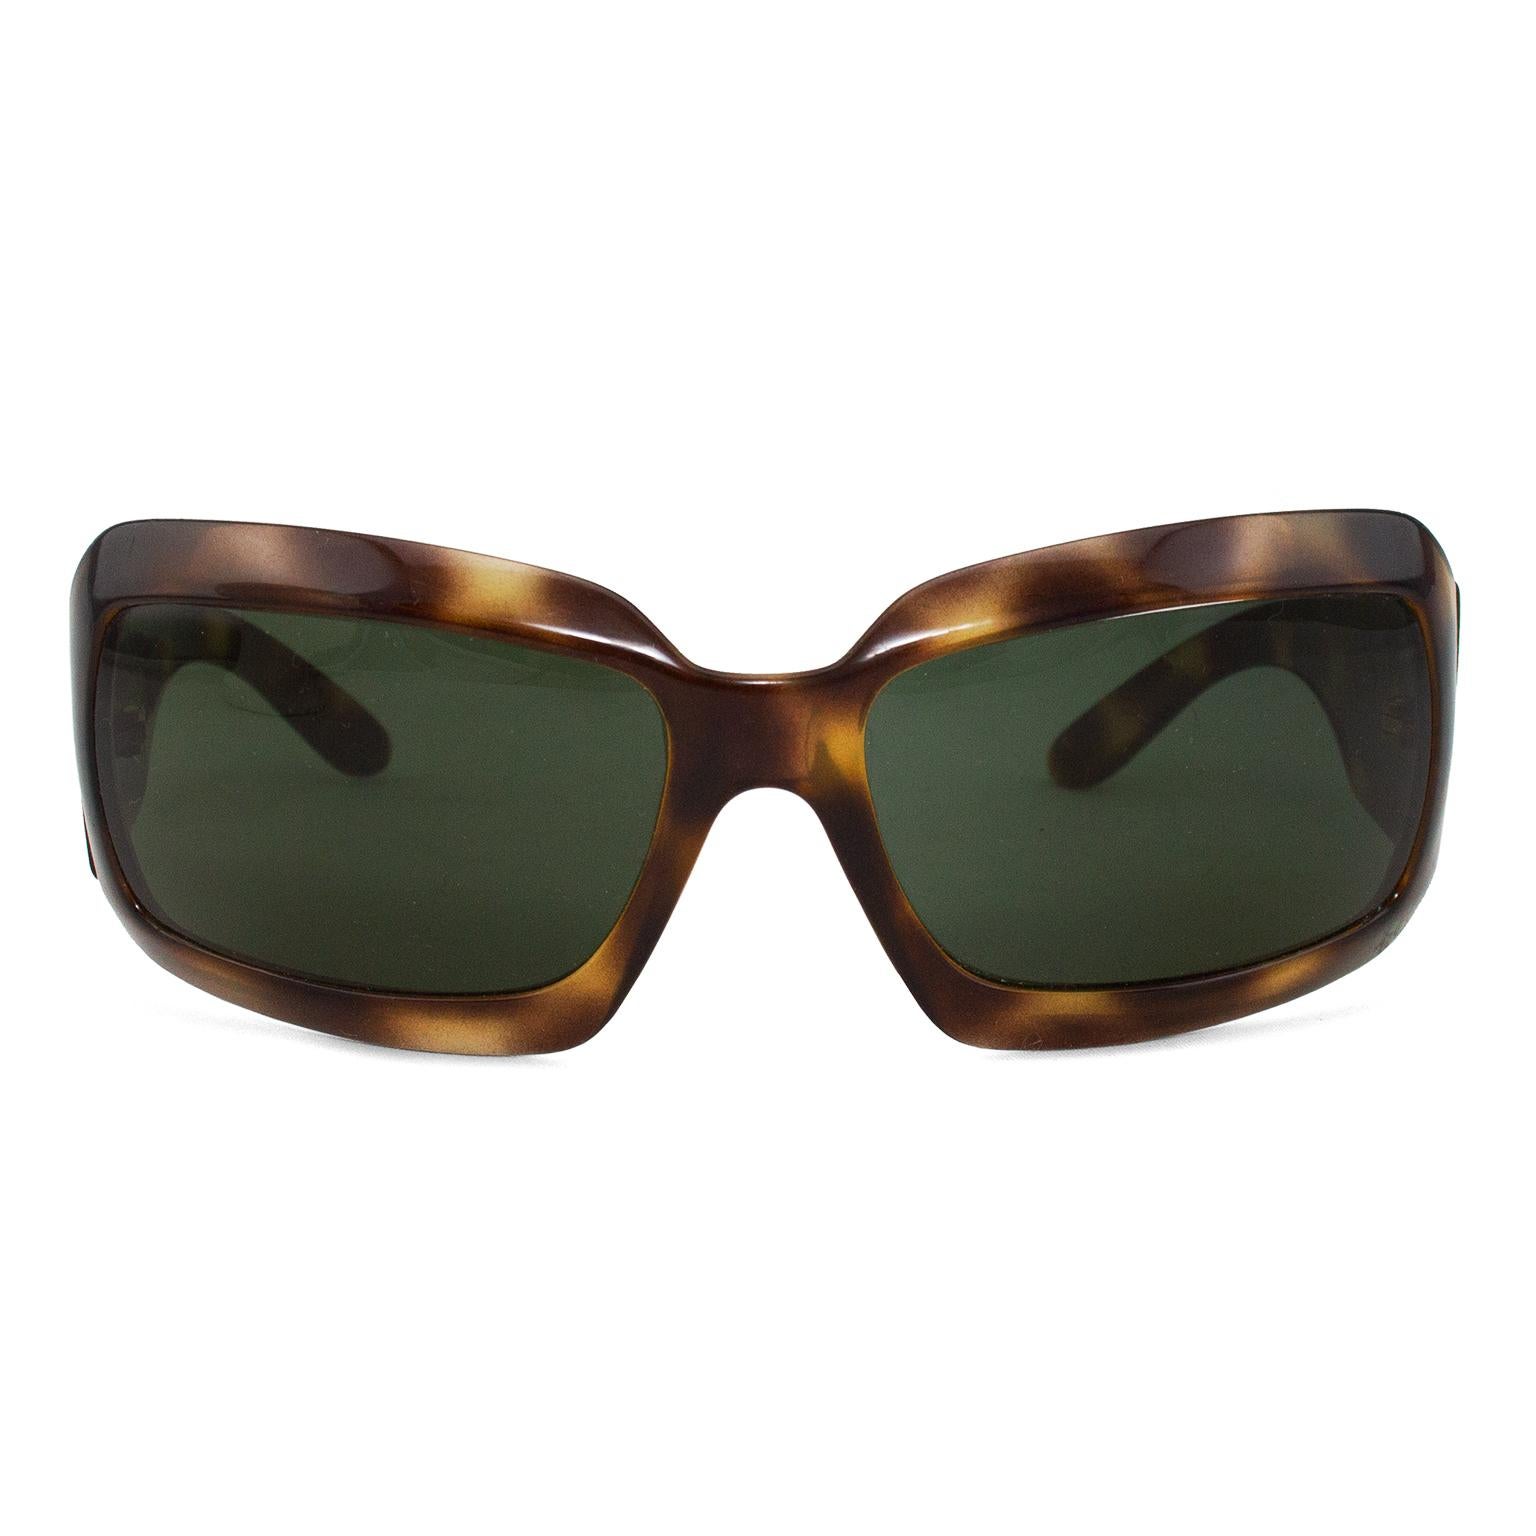 Chic brown tortoise shell sunglasses from the early 2000s. Slight wrap around style. Square lenses with rounded edges. Silver/grey mother of pearl large CC logo on arms. All other Chanel markings stamped in white on interior of arms. Black lenses.